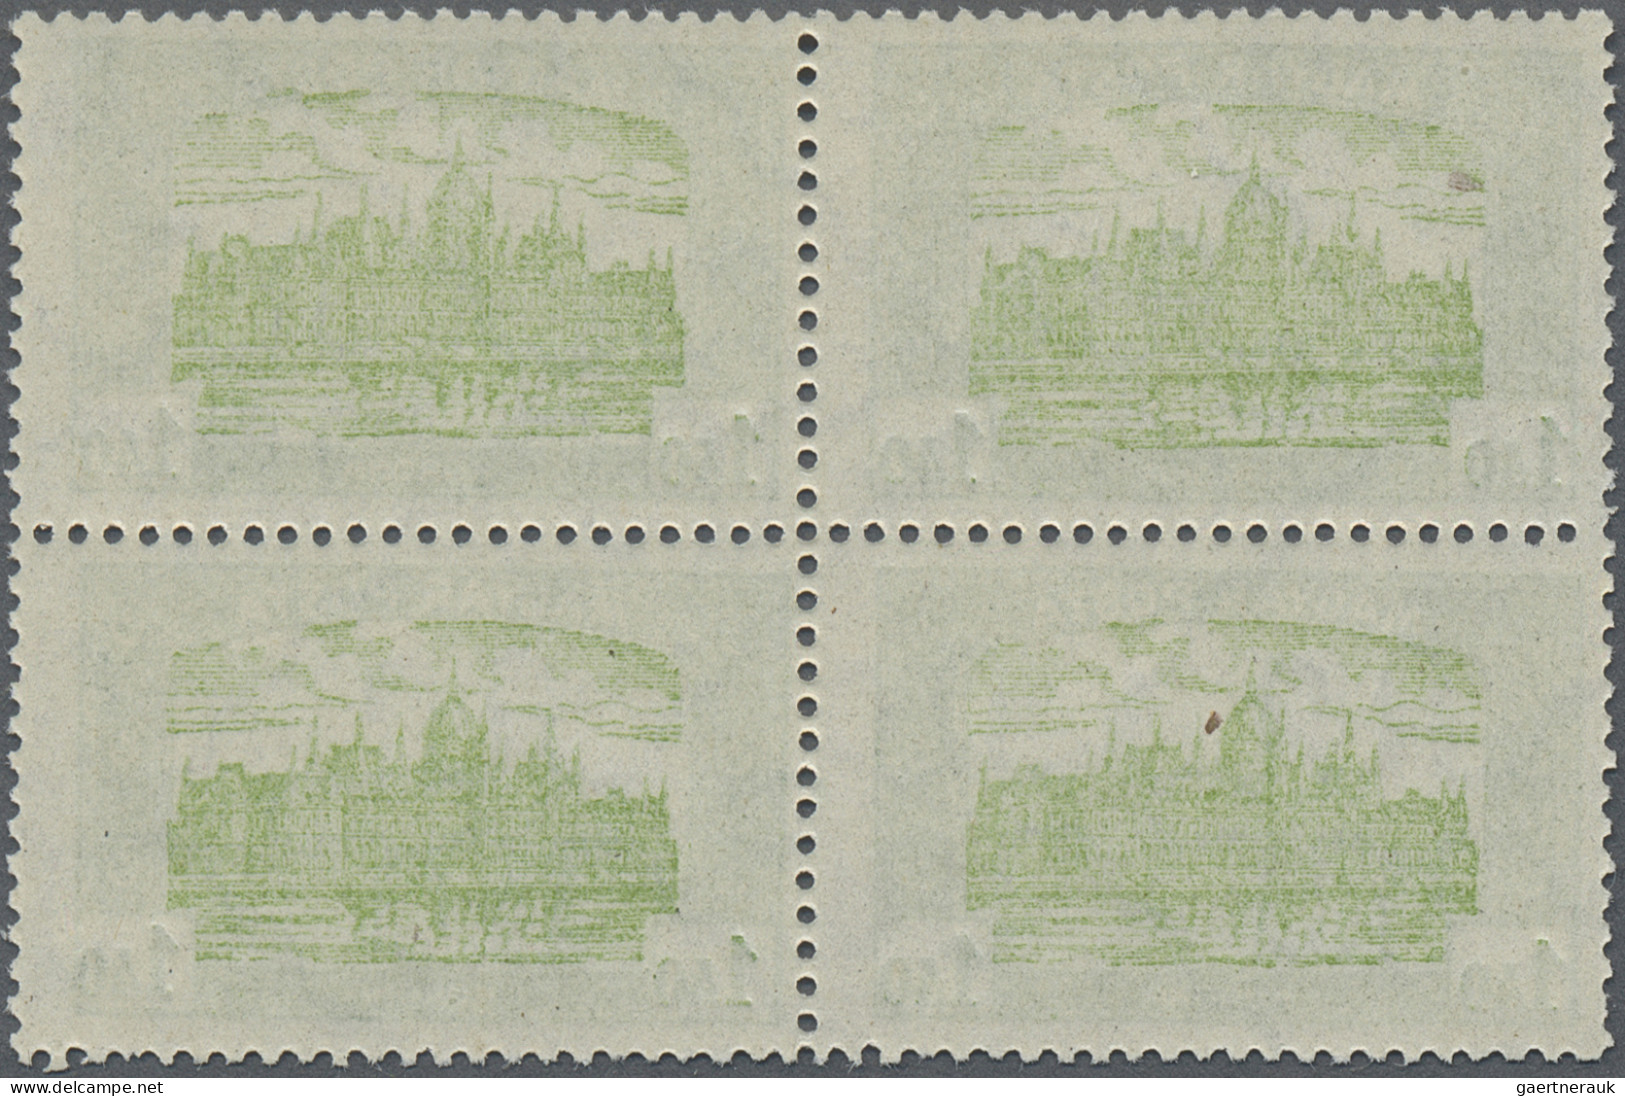 Hungary: 1919, Parliament Building Postage Stamps, 1.40 Kr In Mint Block Of Four - Ungebraucht